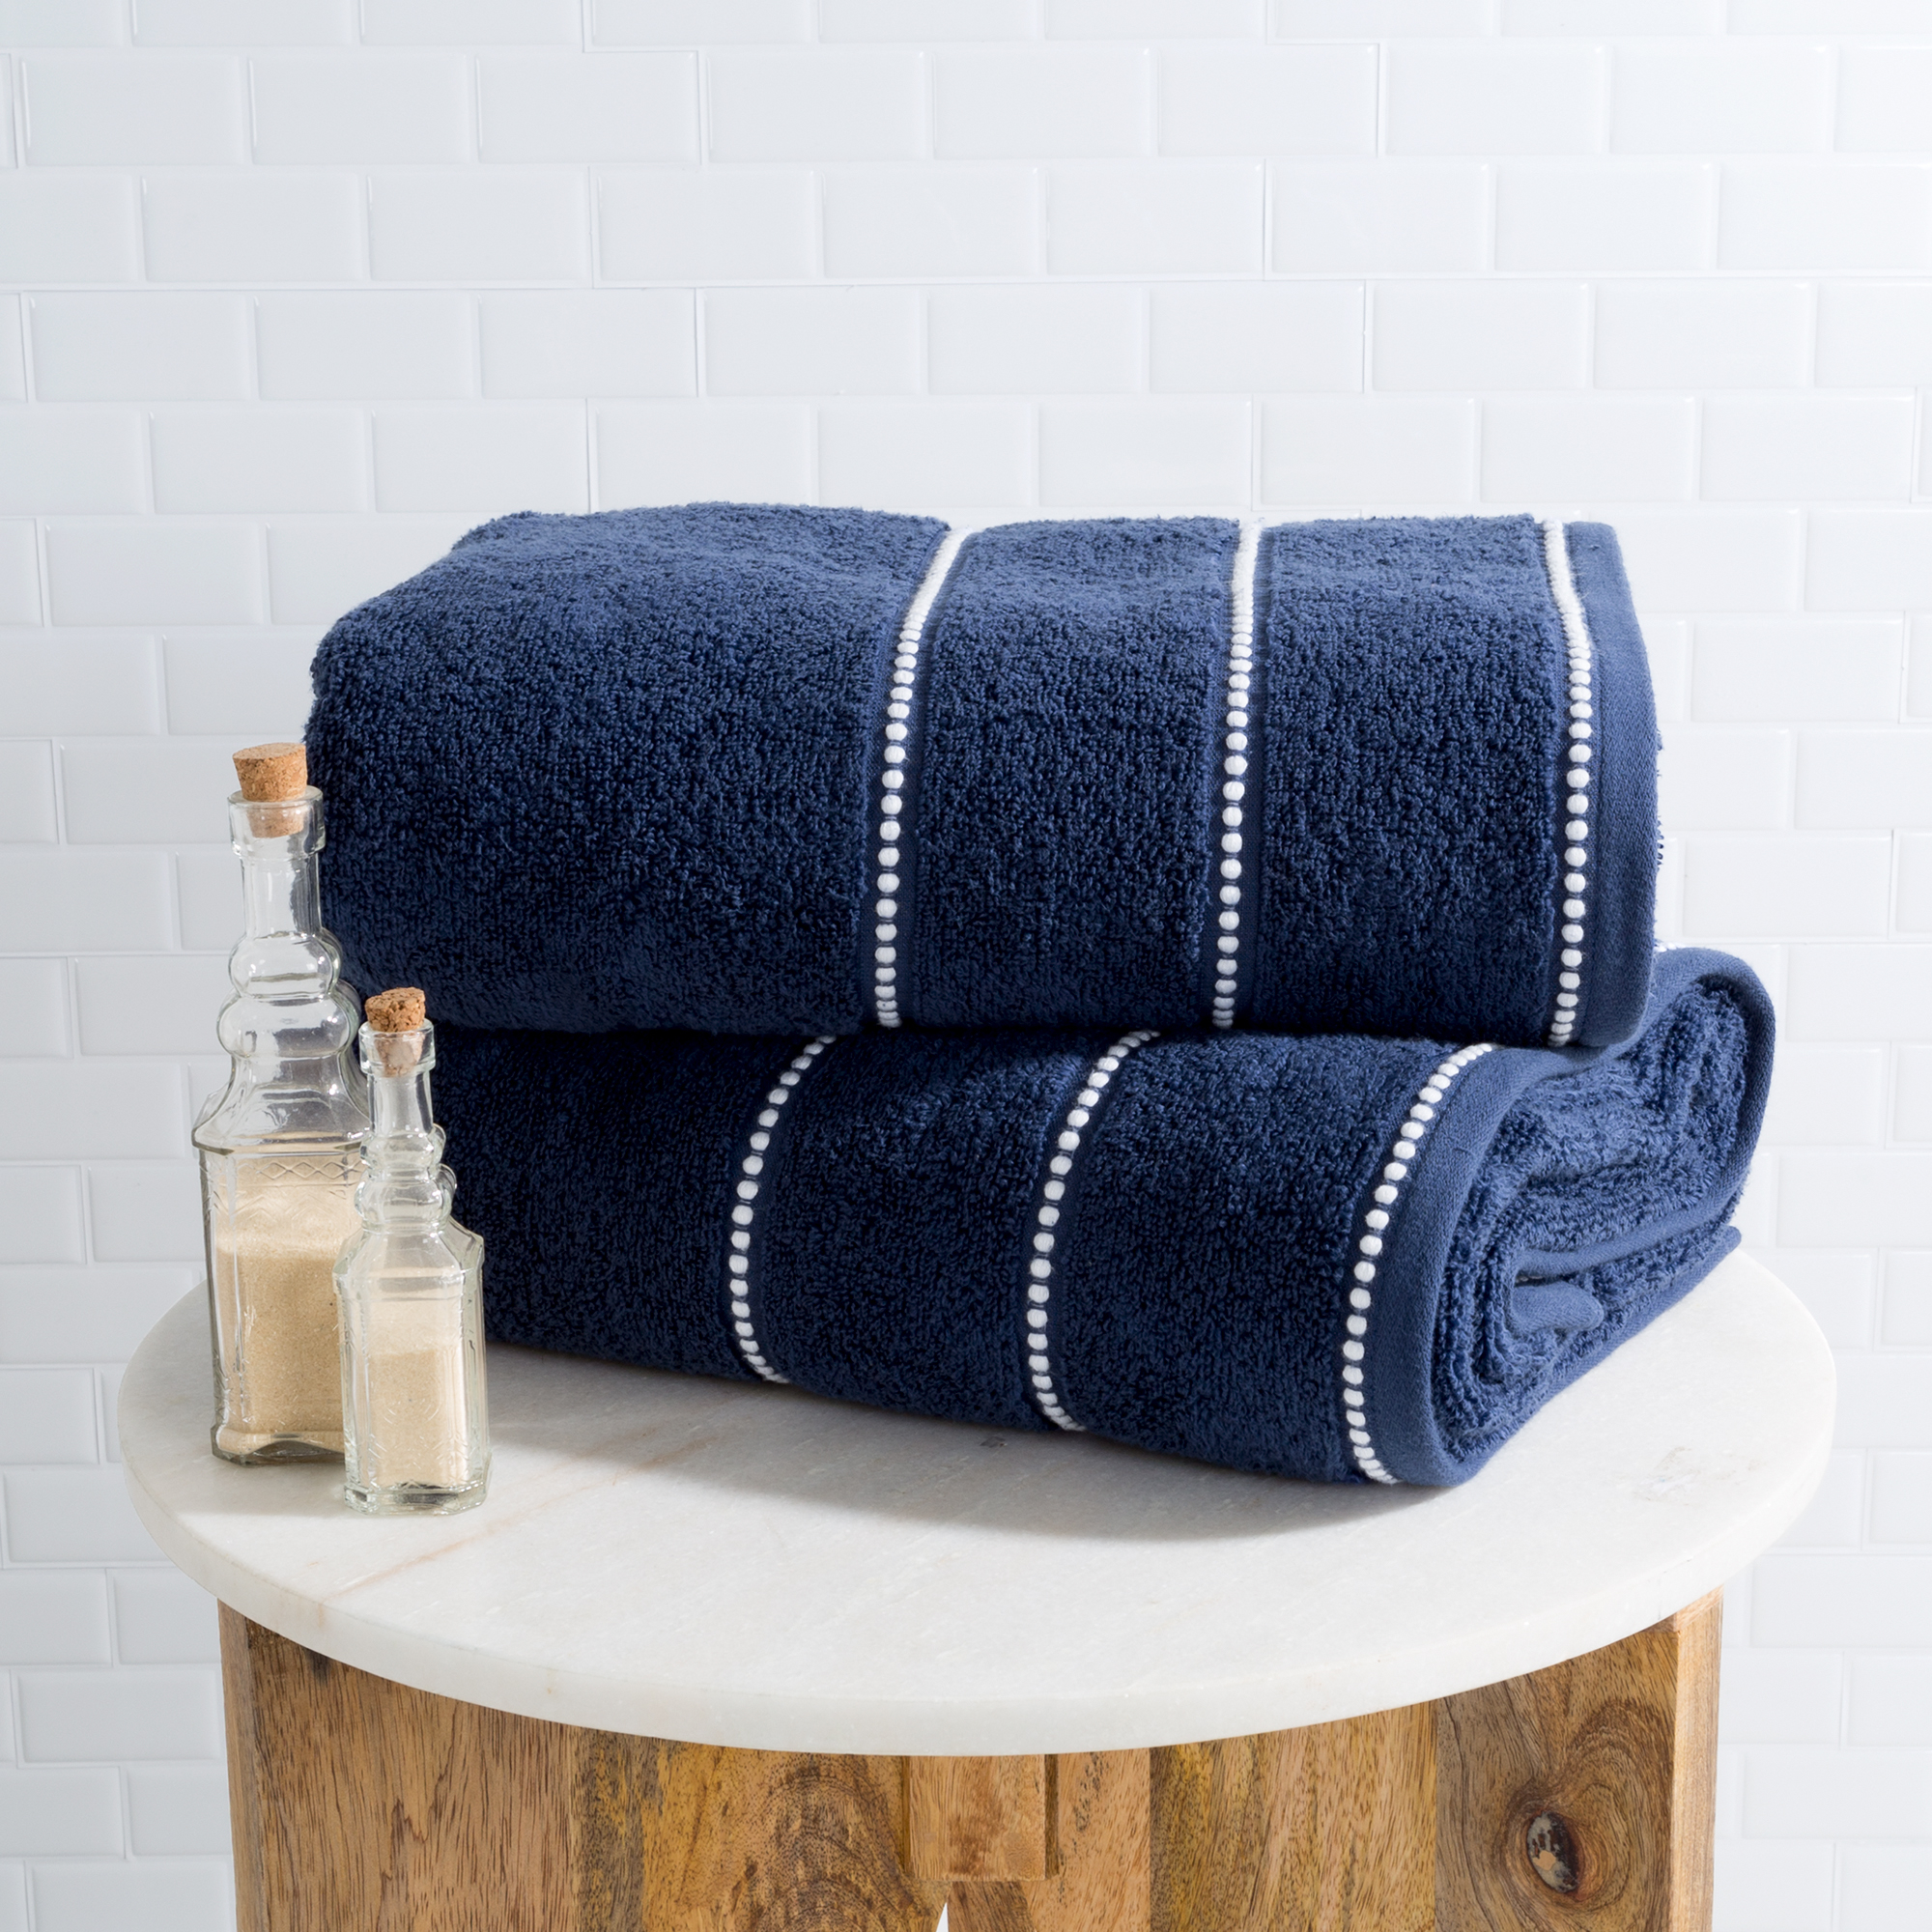 Luxurious Huge 34 X 68 In Cotton Towel Set- 2 Piece Bath Sheet Set Made From 100% Plush Cotton- Quick Dry, Soft And Absorbent Navy